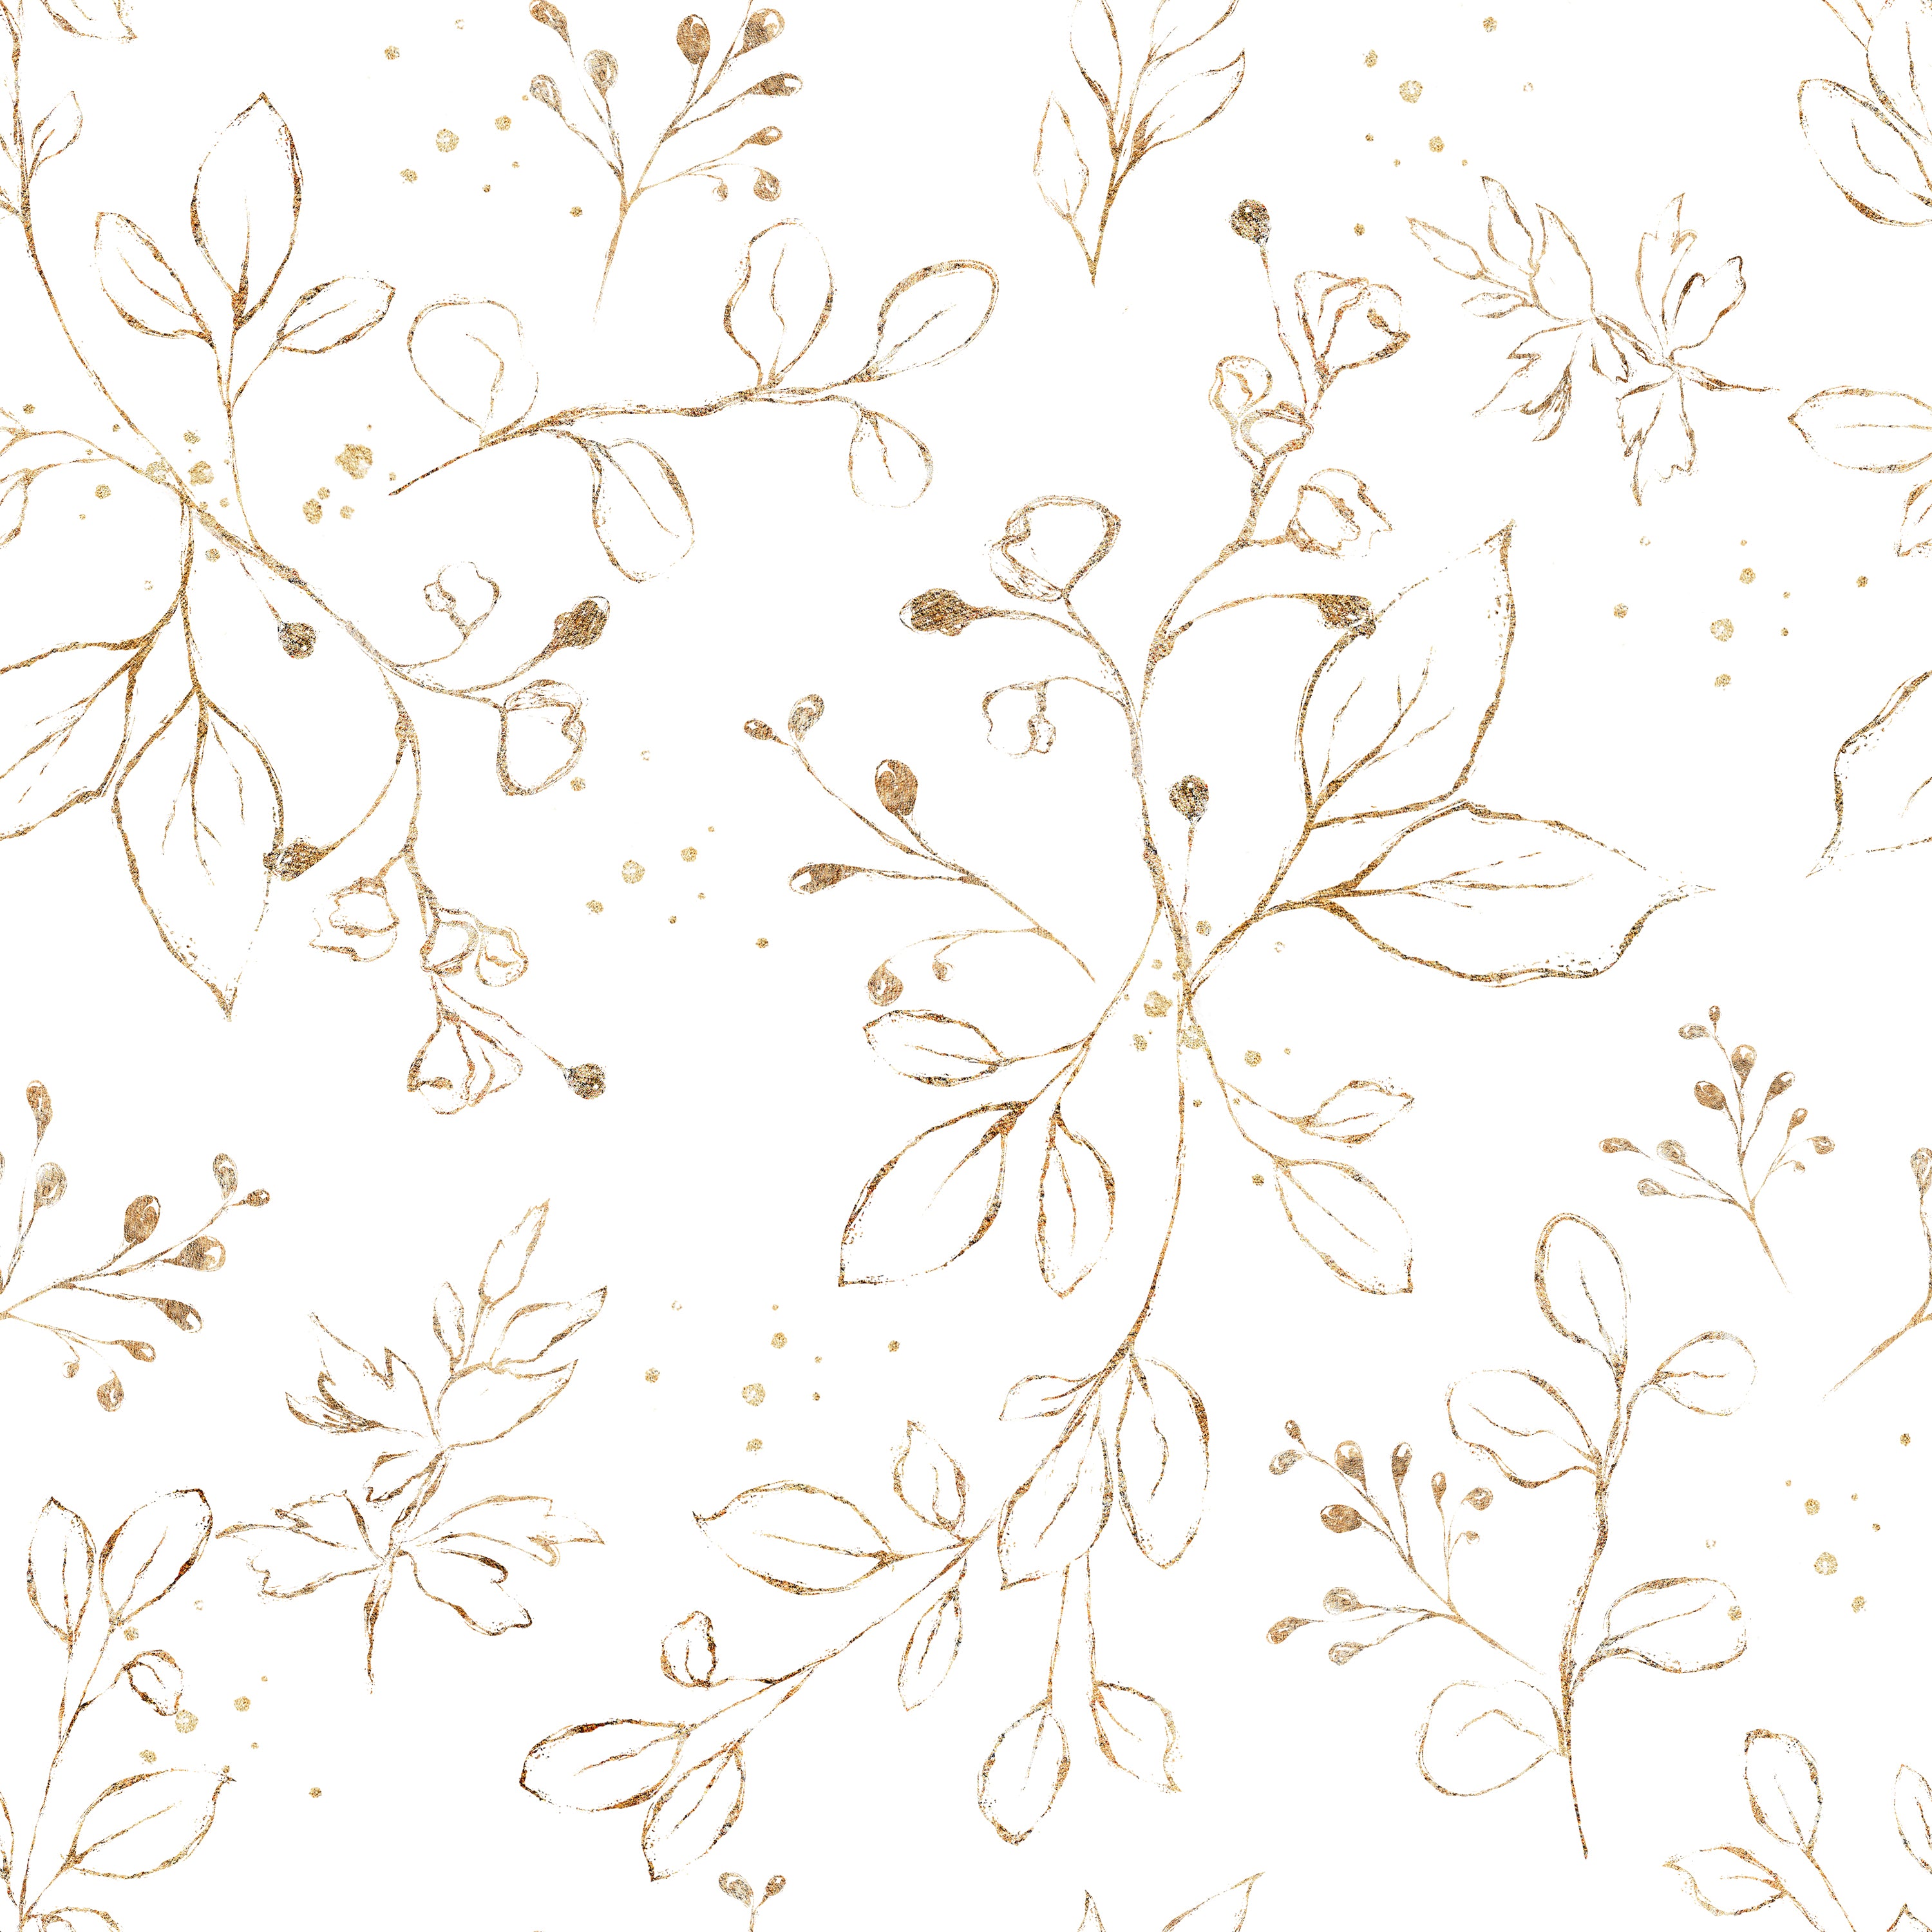 A seamless pattern of Gold Leaves Wallpaper, illustrating the intricate watercolor leaves and berries in gold, casting a luxurious and warm ambiance in any room it adorns